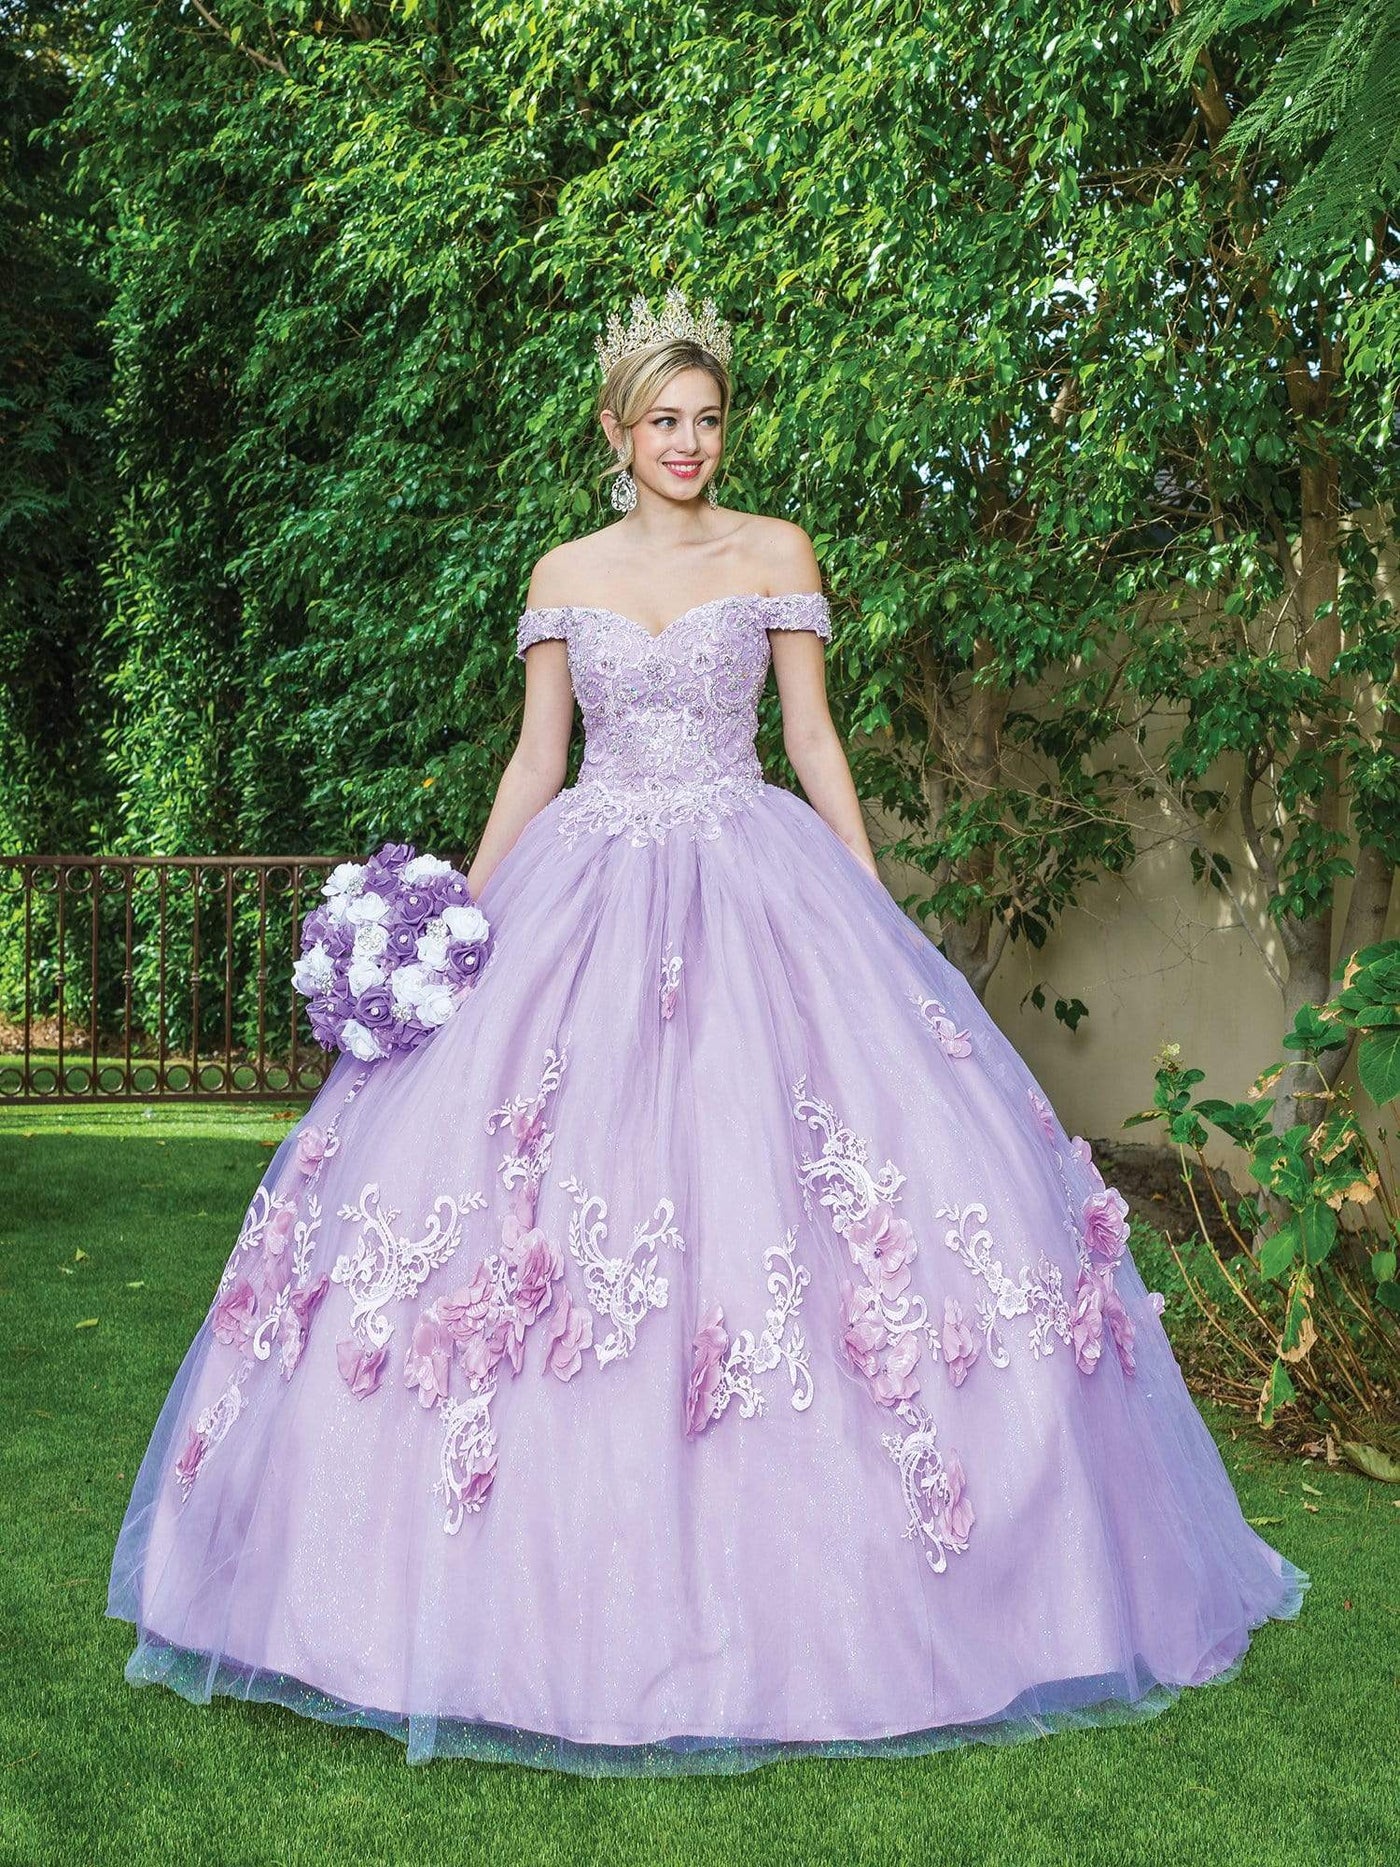 Dancing Queen - 1598 Floral Accented Ballgown Quinceanera Dresses